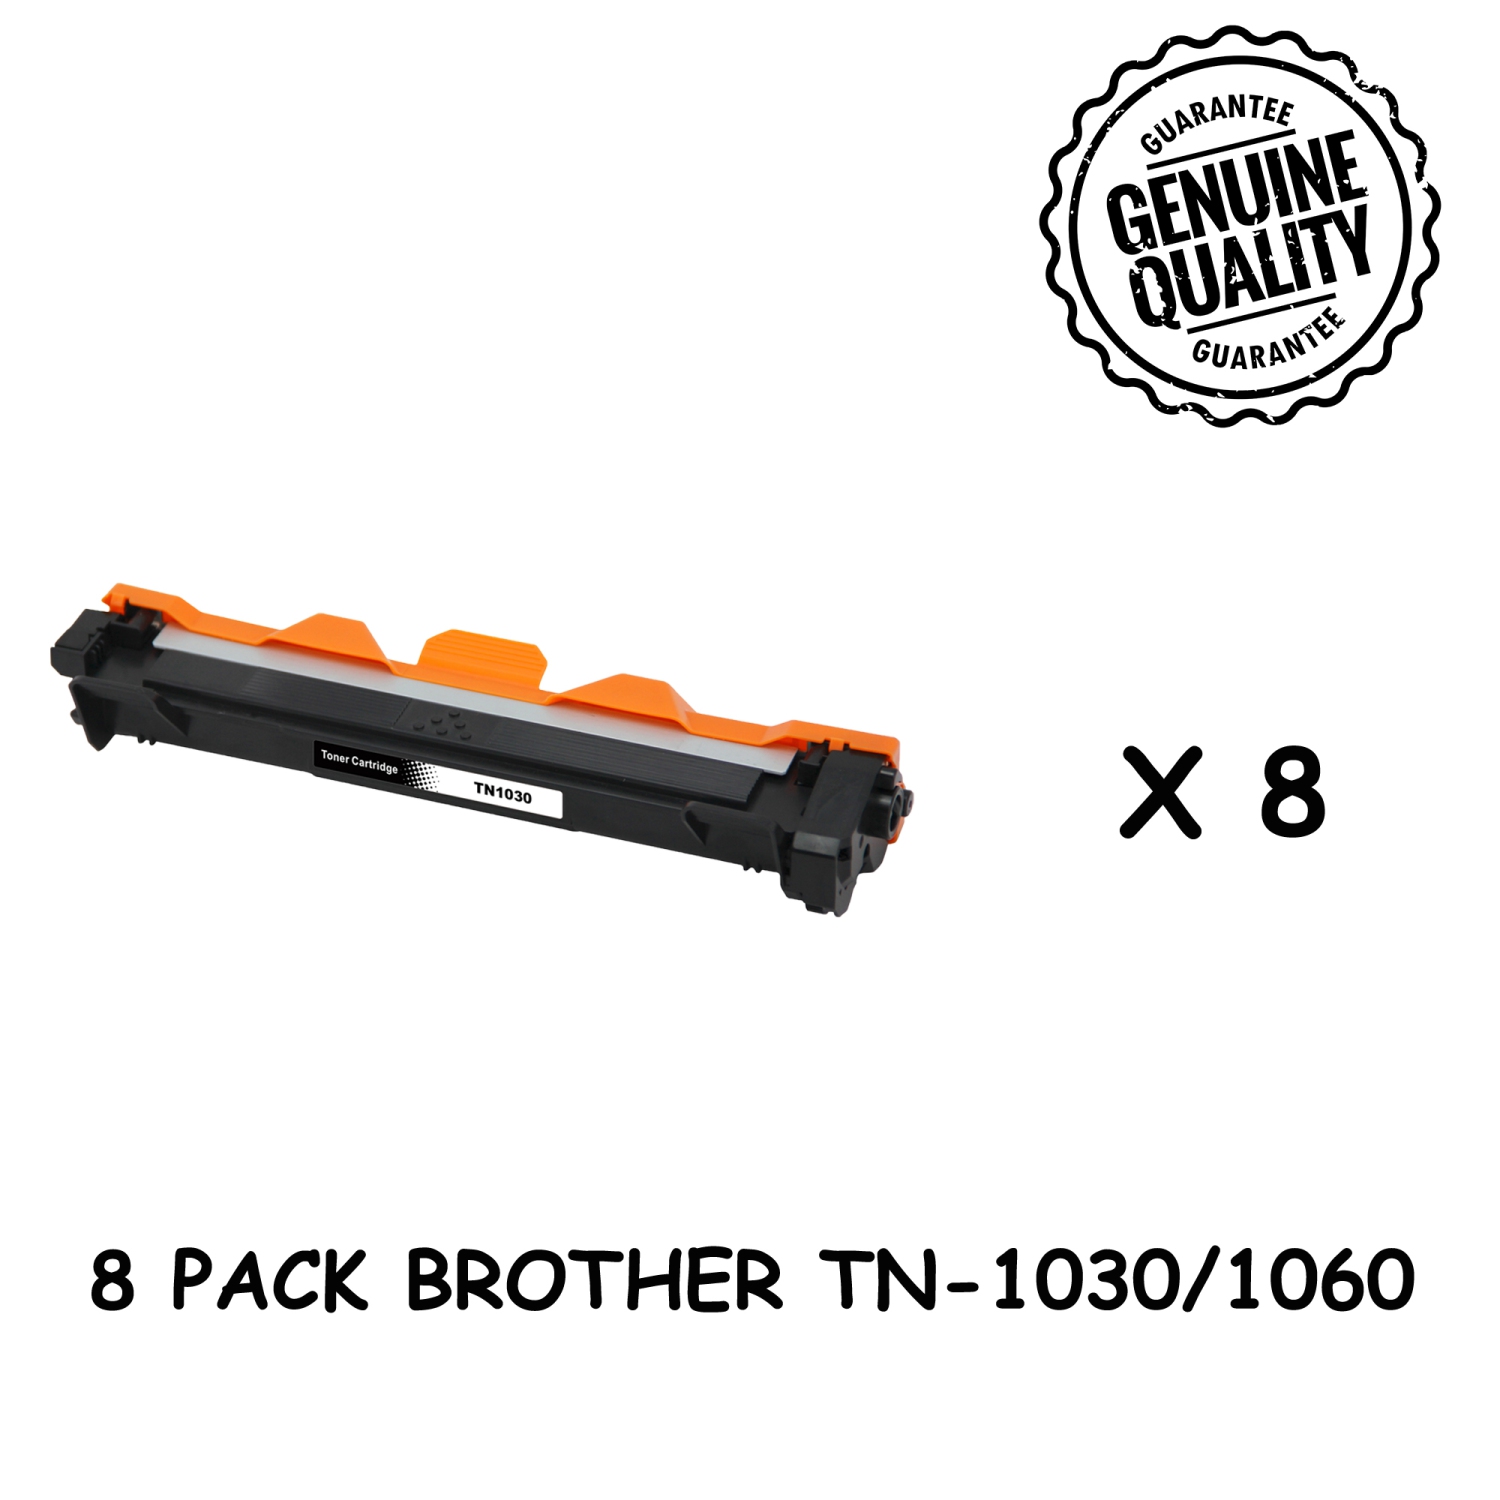 8PK TN1030  TN-1030 Toner Cartridge Compatible For Brother HL-1112  DCP-1512 